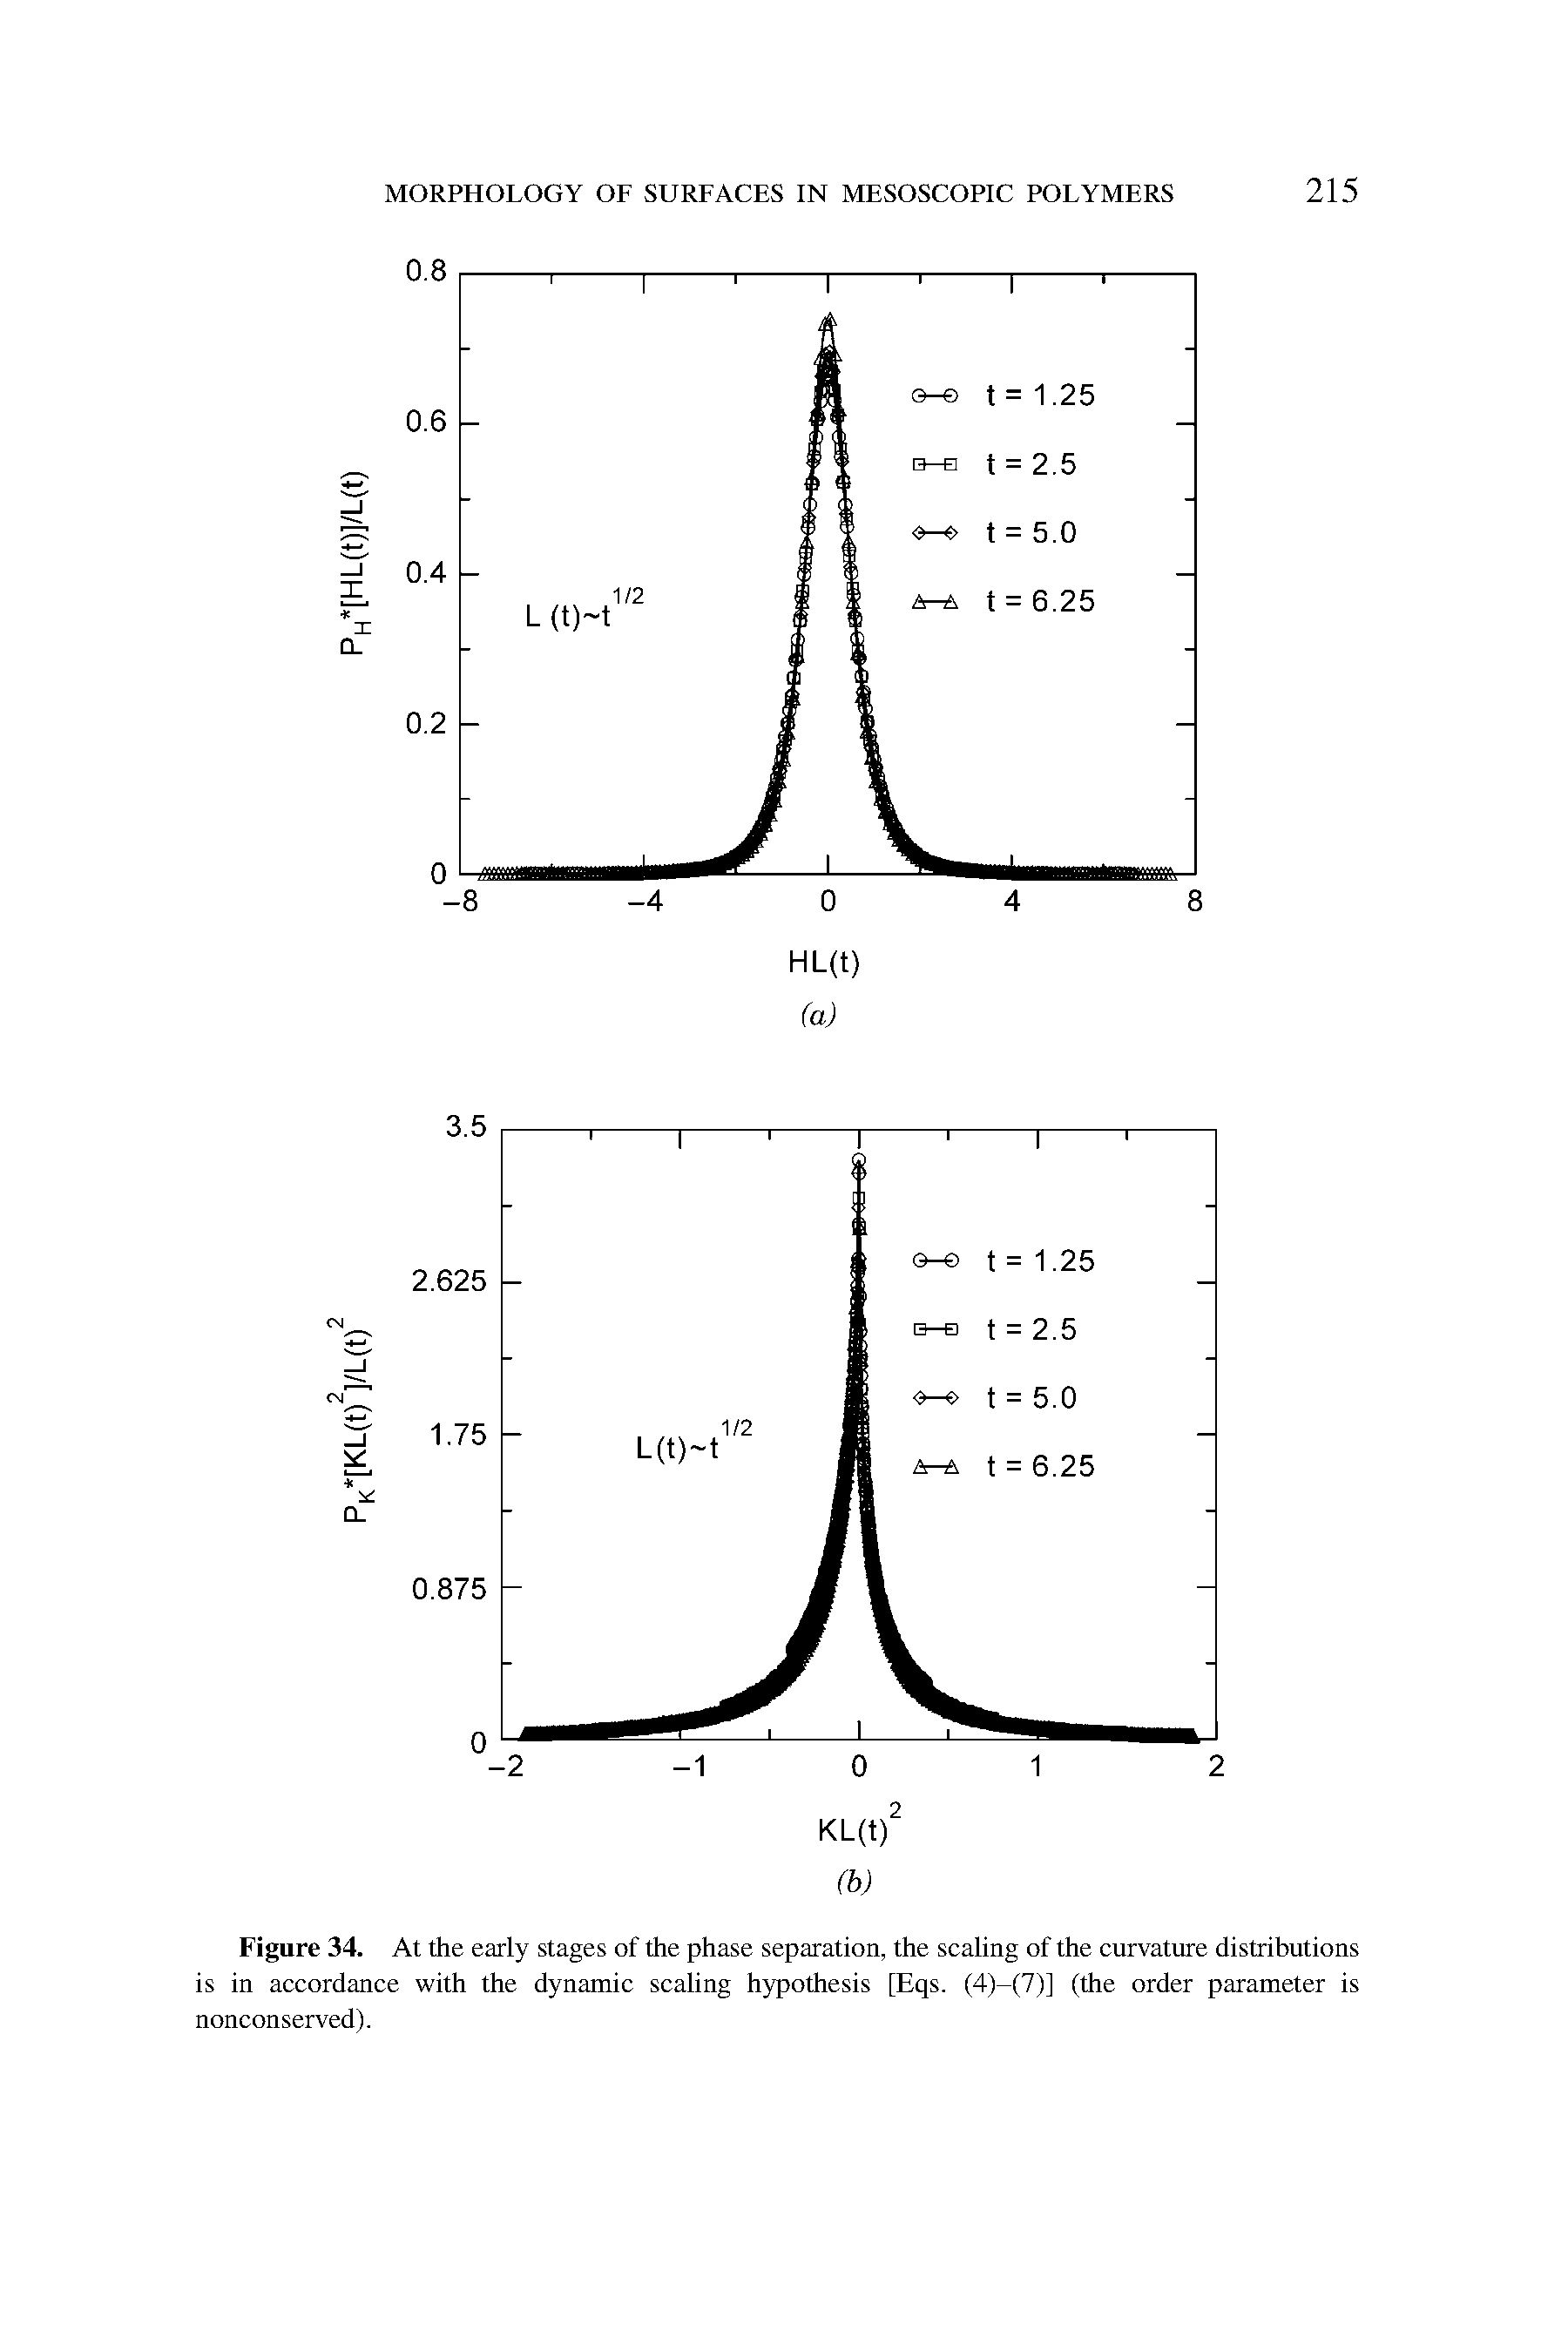 Figure 34. At the early stages of the phase separation, the scaling of the curvature distributions is in accordance with the dynamic scaling hypothesis [Eqs. (4)—(7)] (the order parameter is nonconserved).